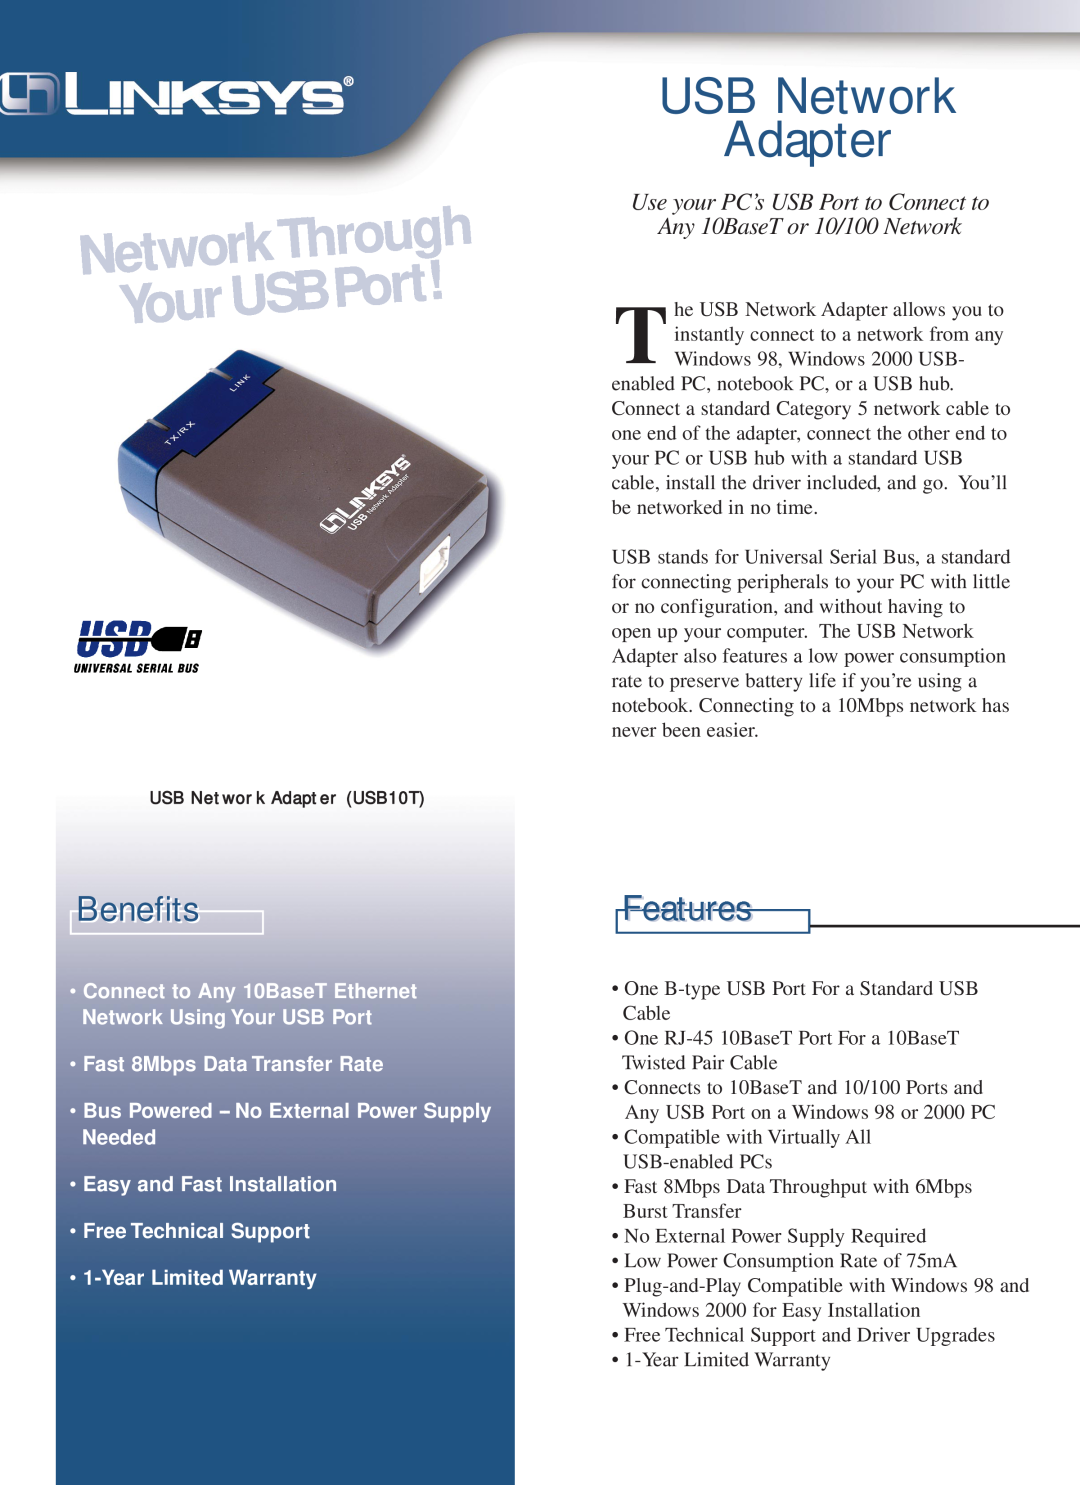 Linksys USB10T warranty YourUSBPort, Through, USB Network Adapter, Benefits, Features, Fast 8Mbps Data Transfer Rate 